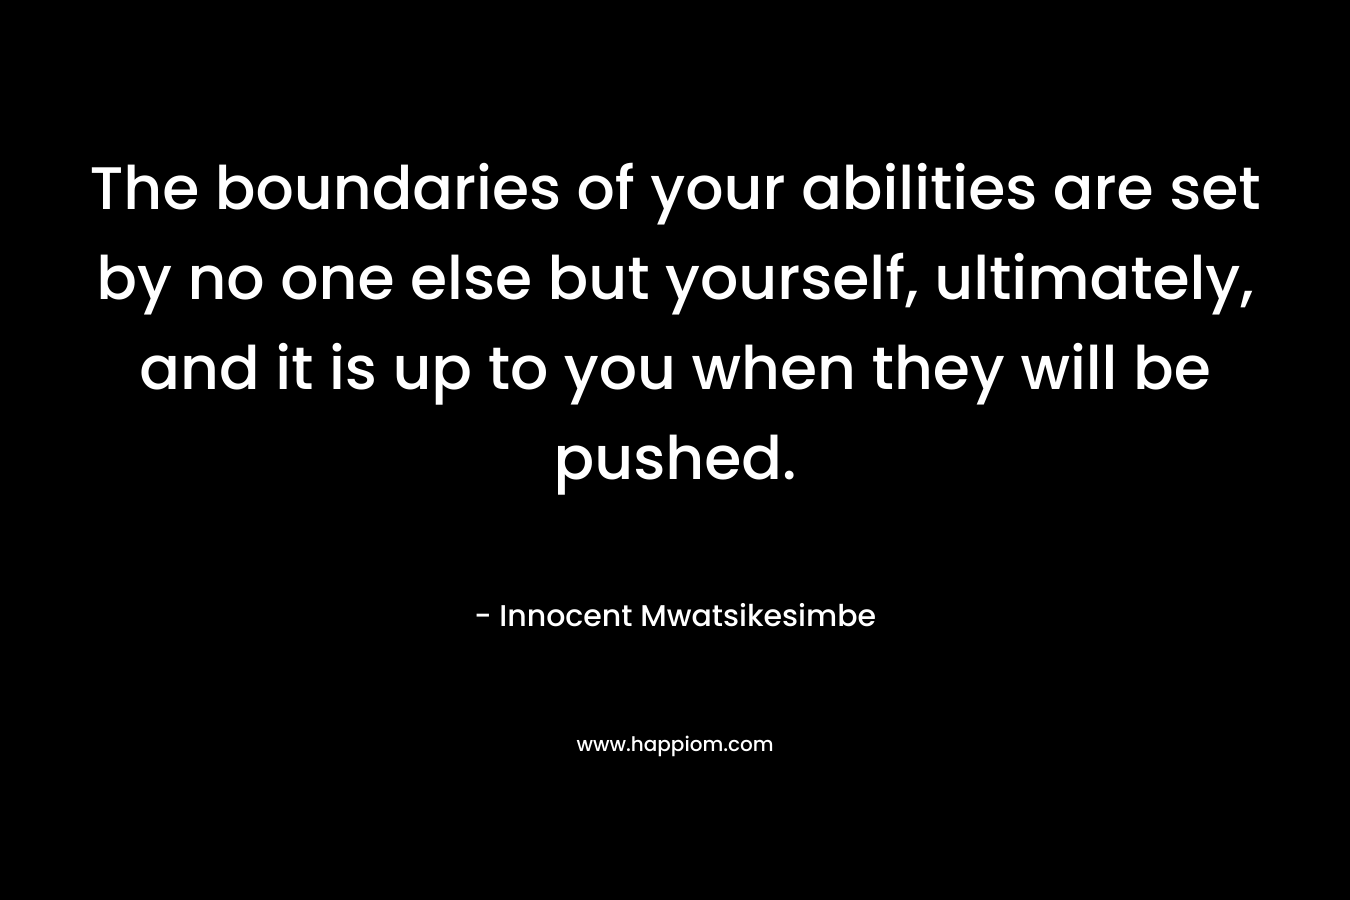 The boundaries of your abilities are set by no one else but yourself, ultimately, and it is up to you when they will be pushed.